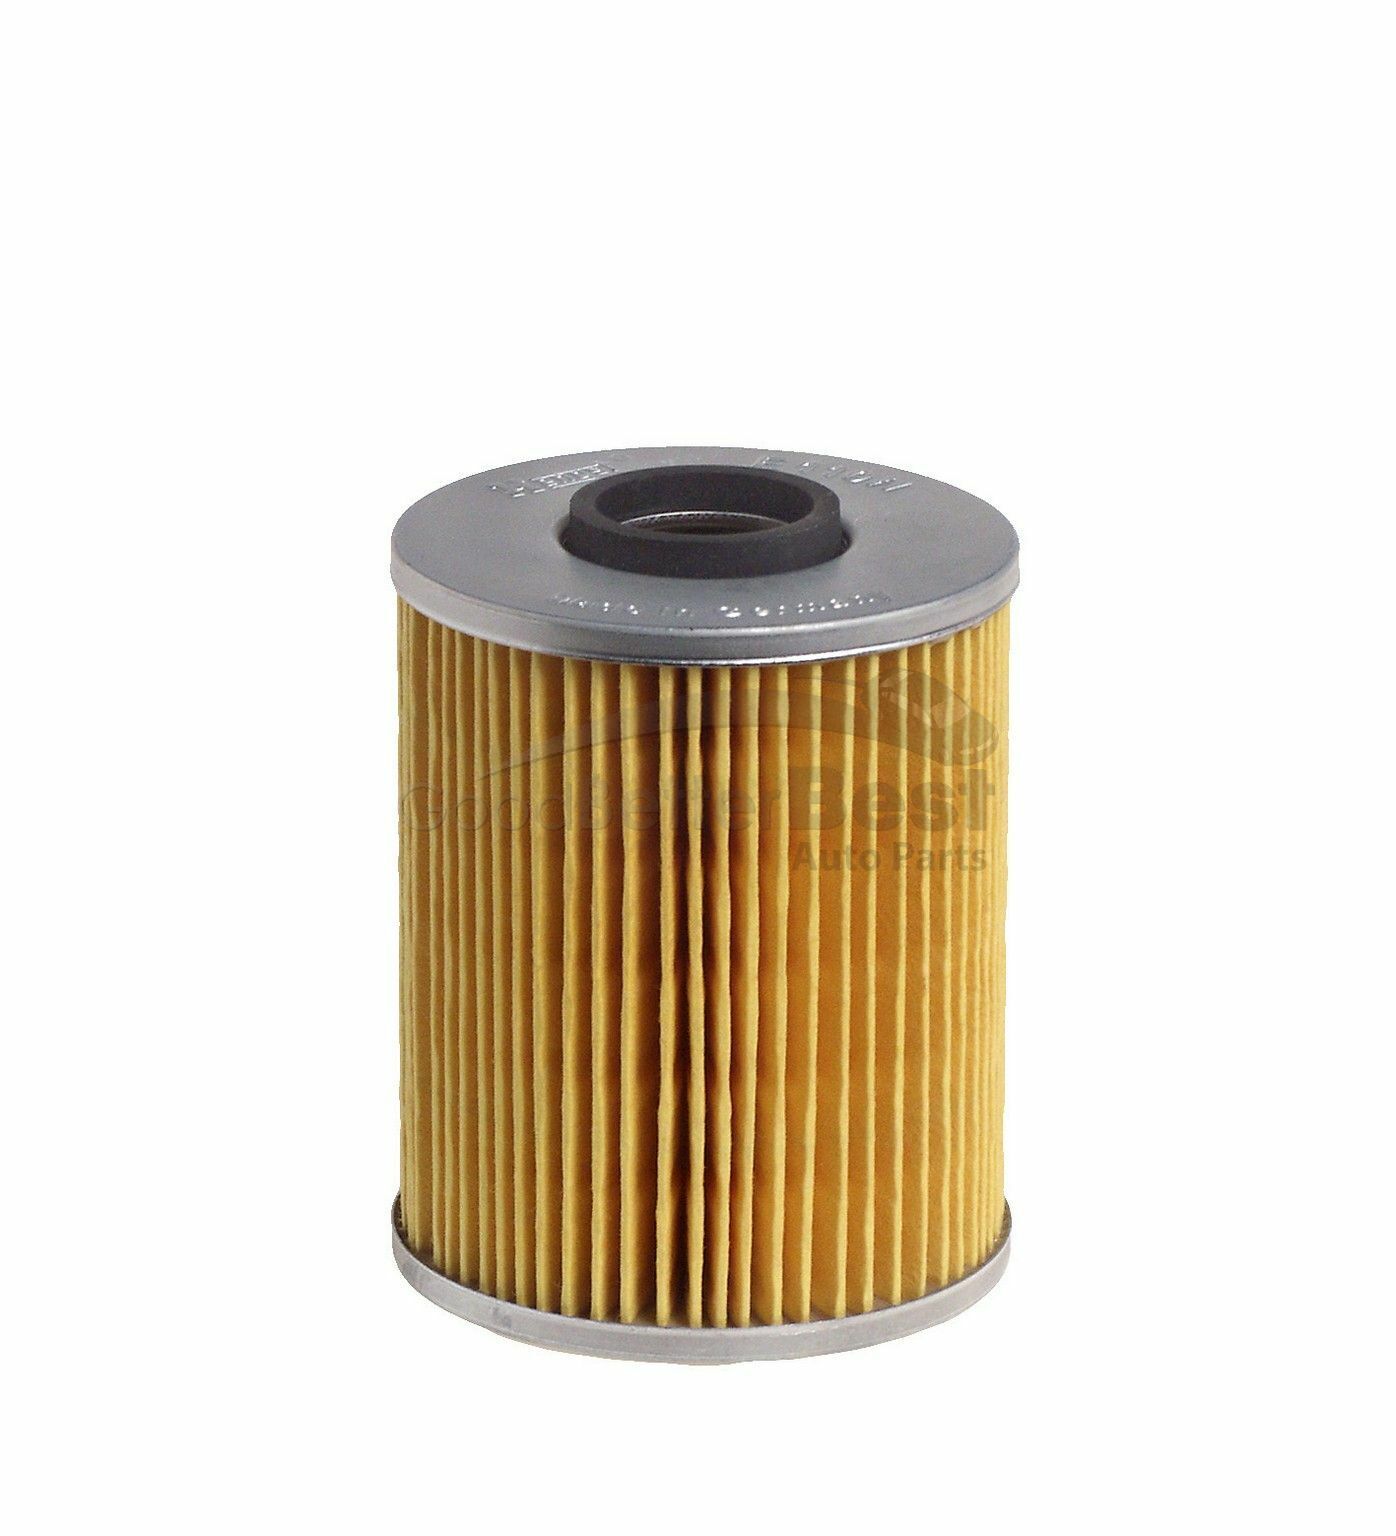 One New Hengst Engine Oil Filter E110HD24 11421130389 for BMW